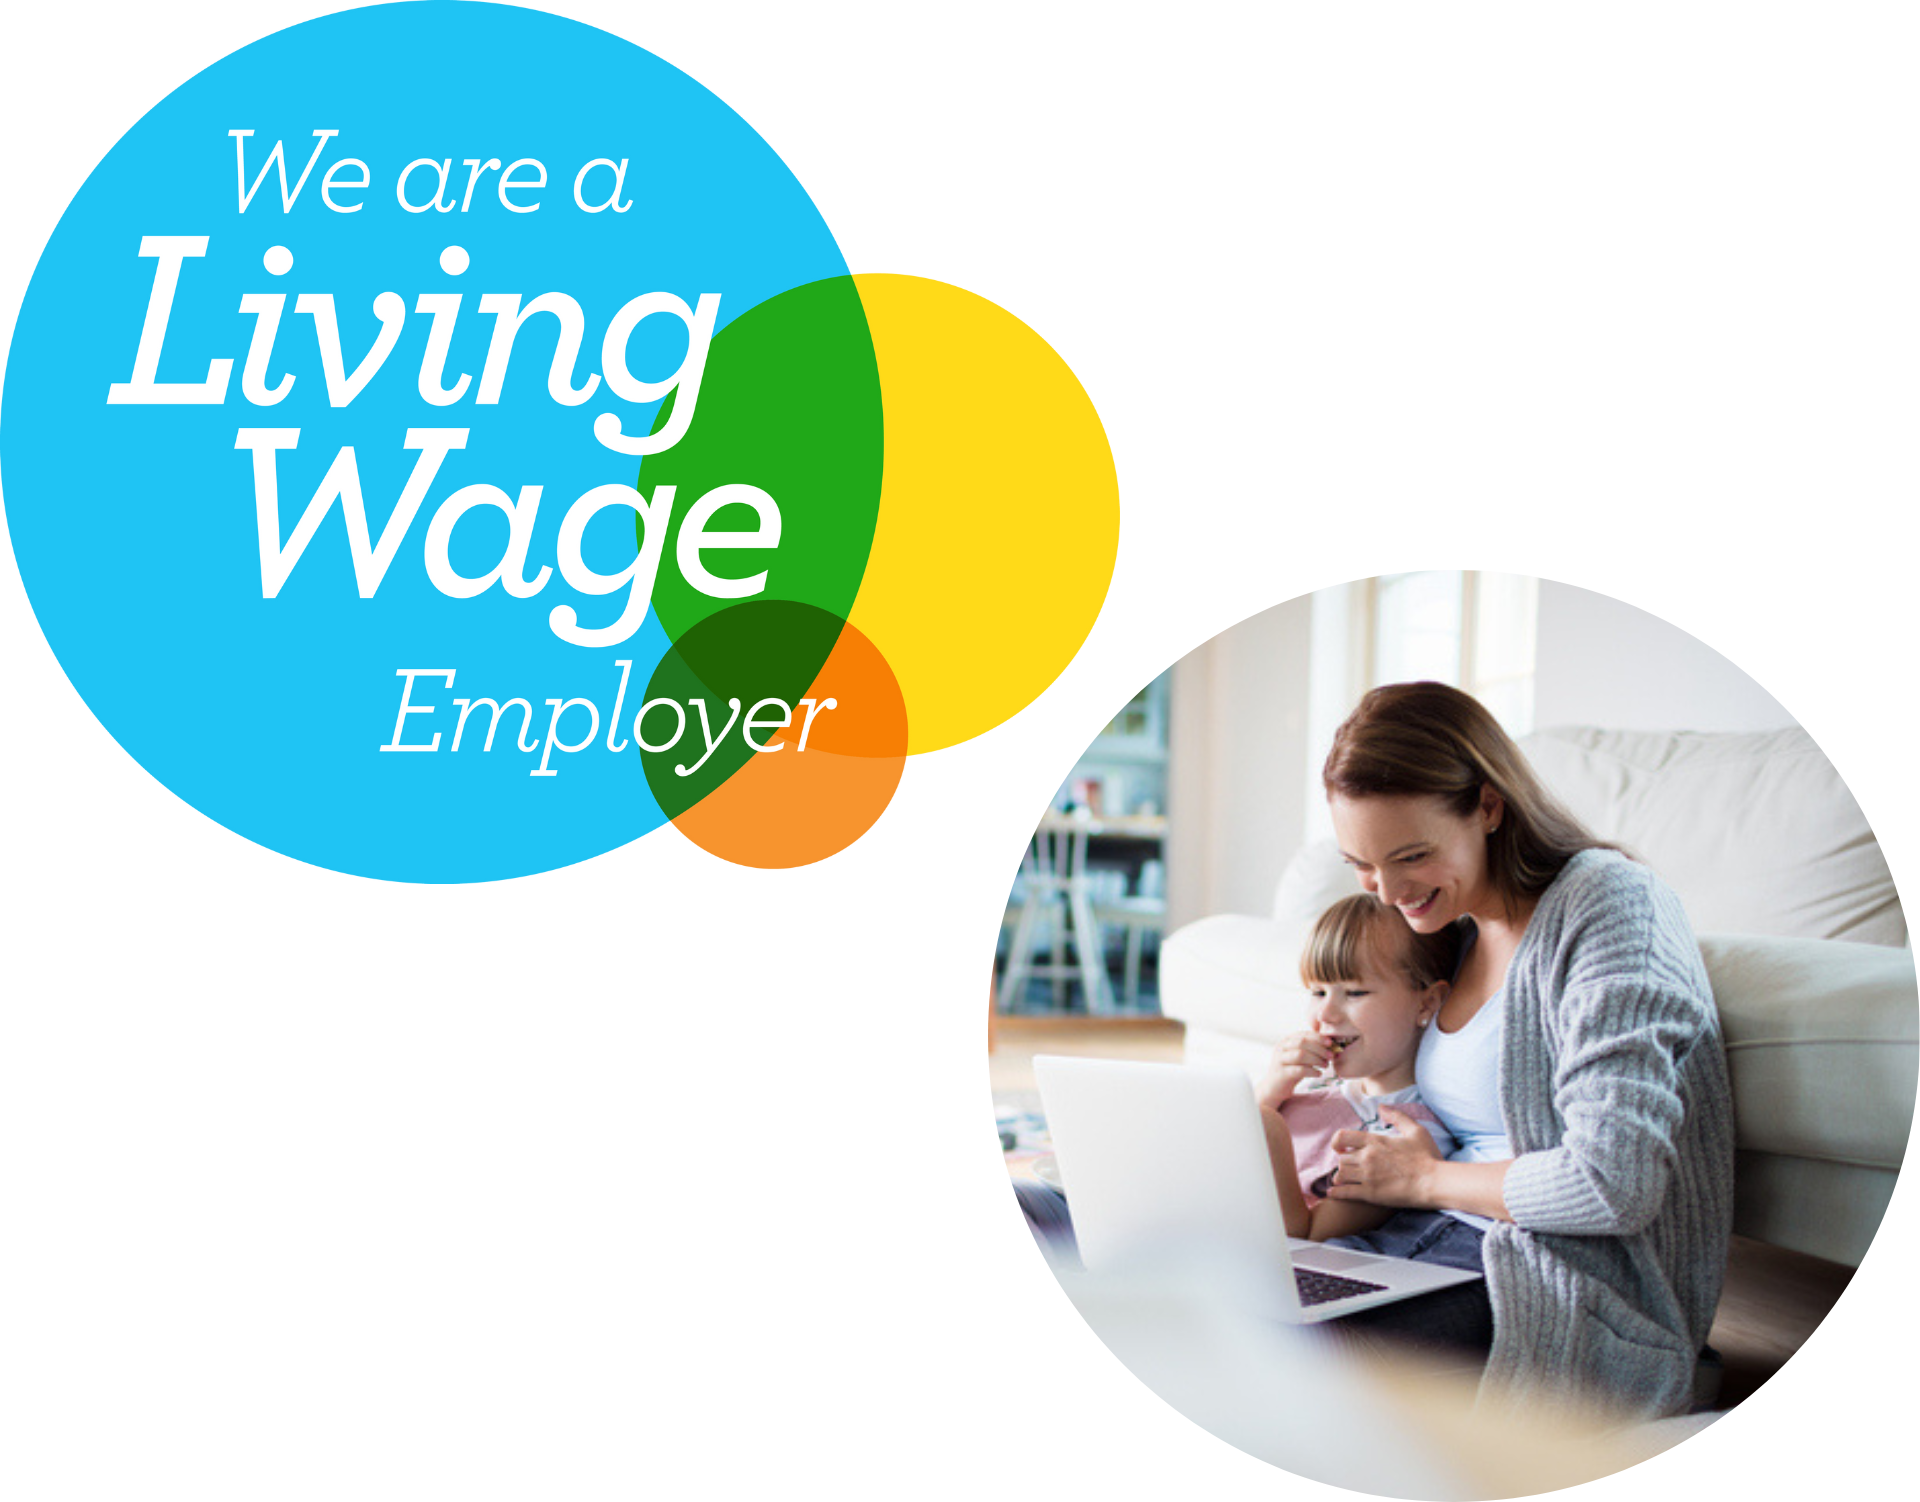 Two circular images show the National Living Wage badge and a smiling young woman cuddling a little girl. They sat on the floor and leaned back on the sofa while looking at a laptop.